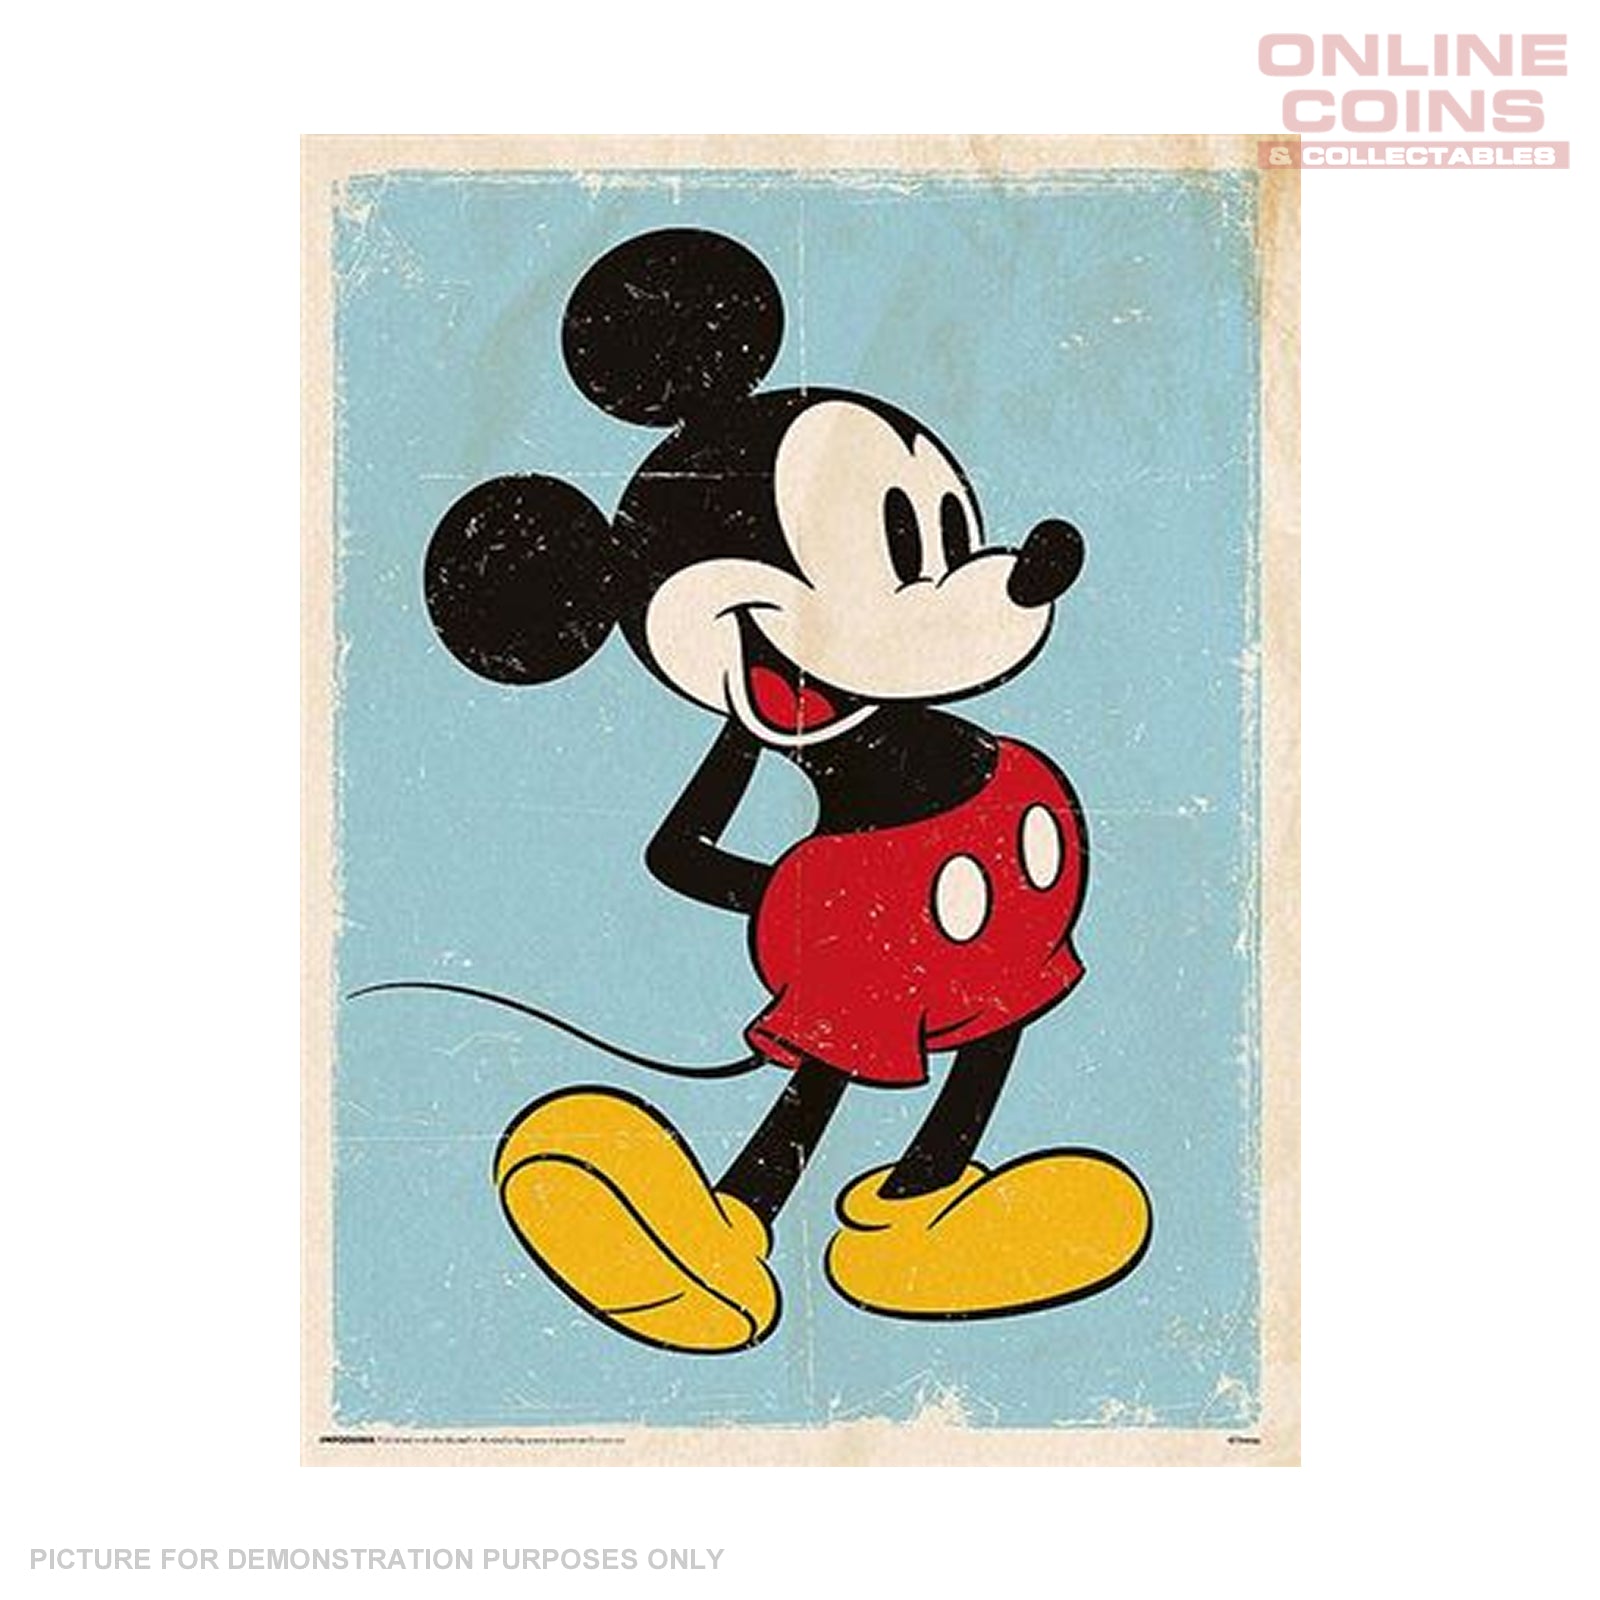 Disney Officially Licensed Art Print - Mickey Mouse Retro A3 Print